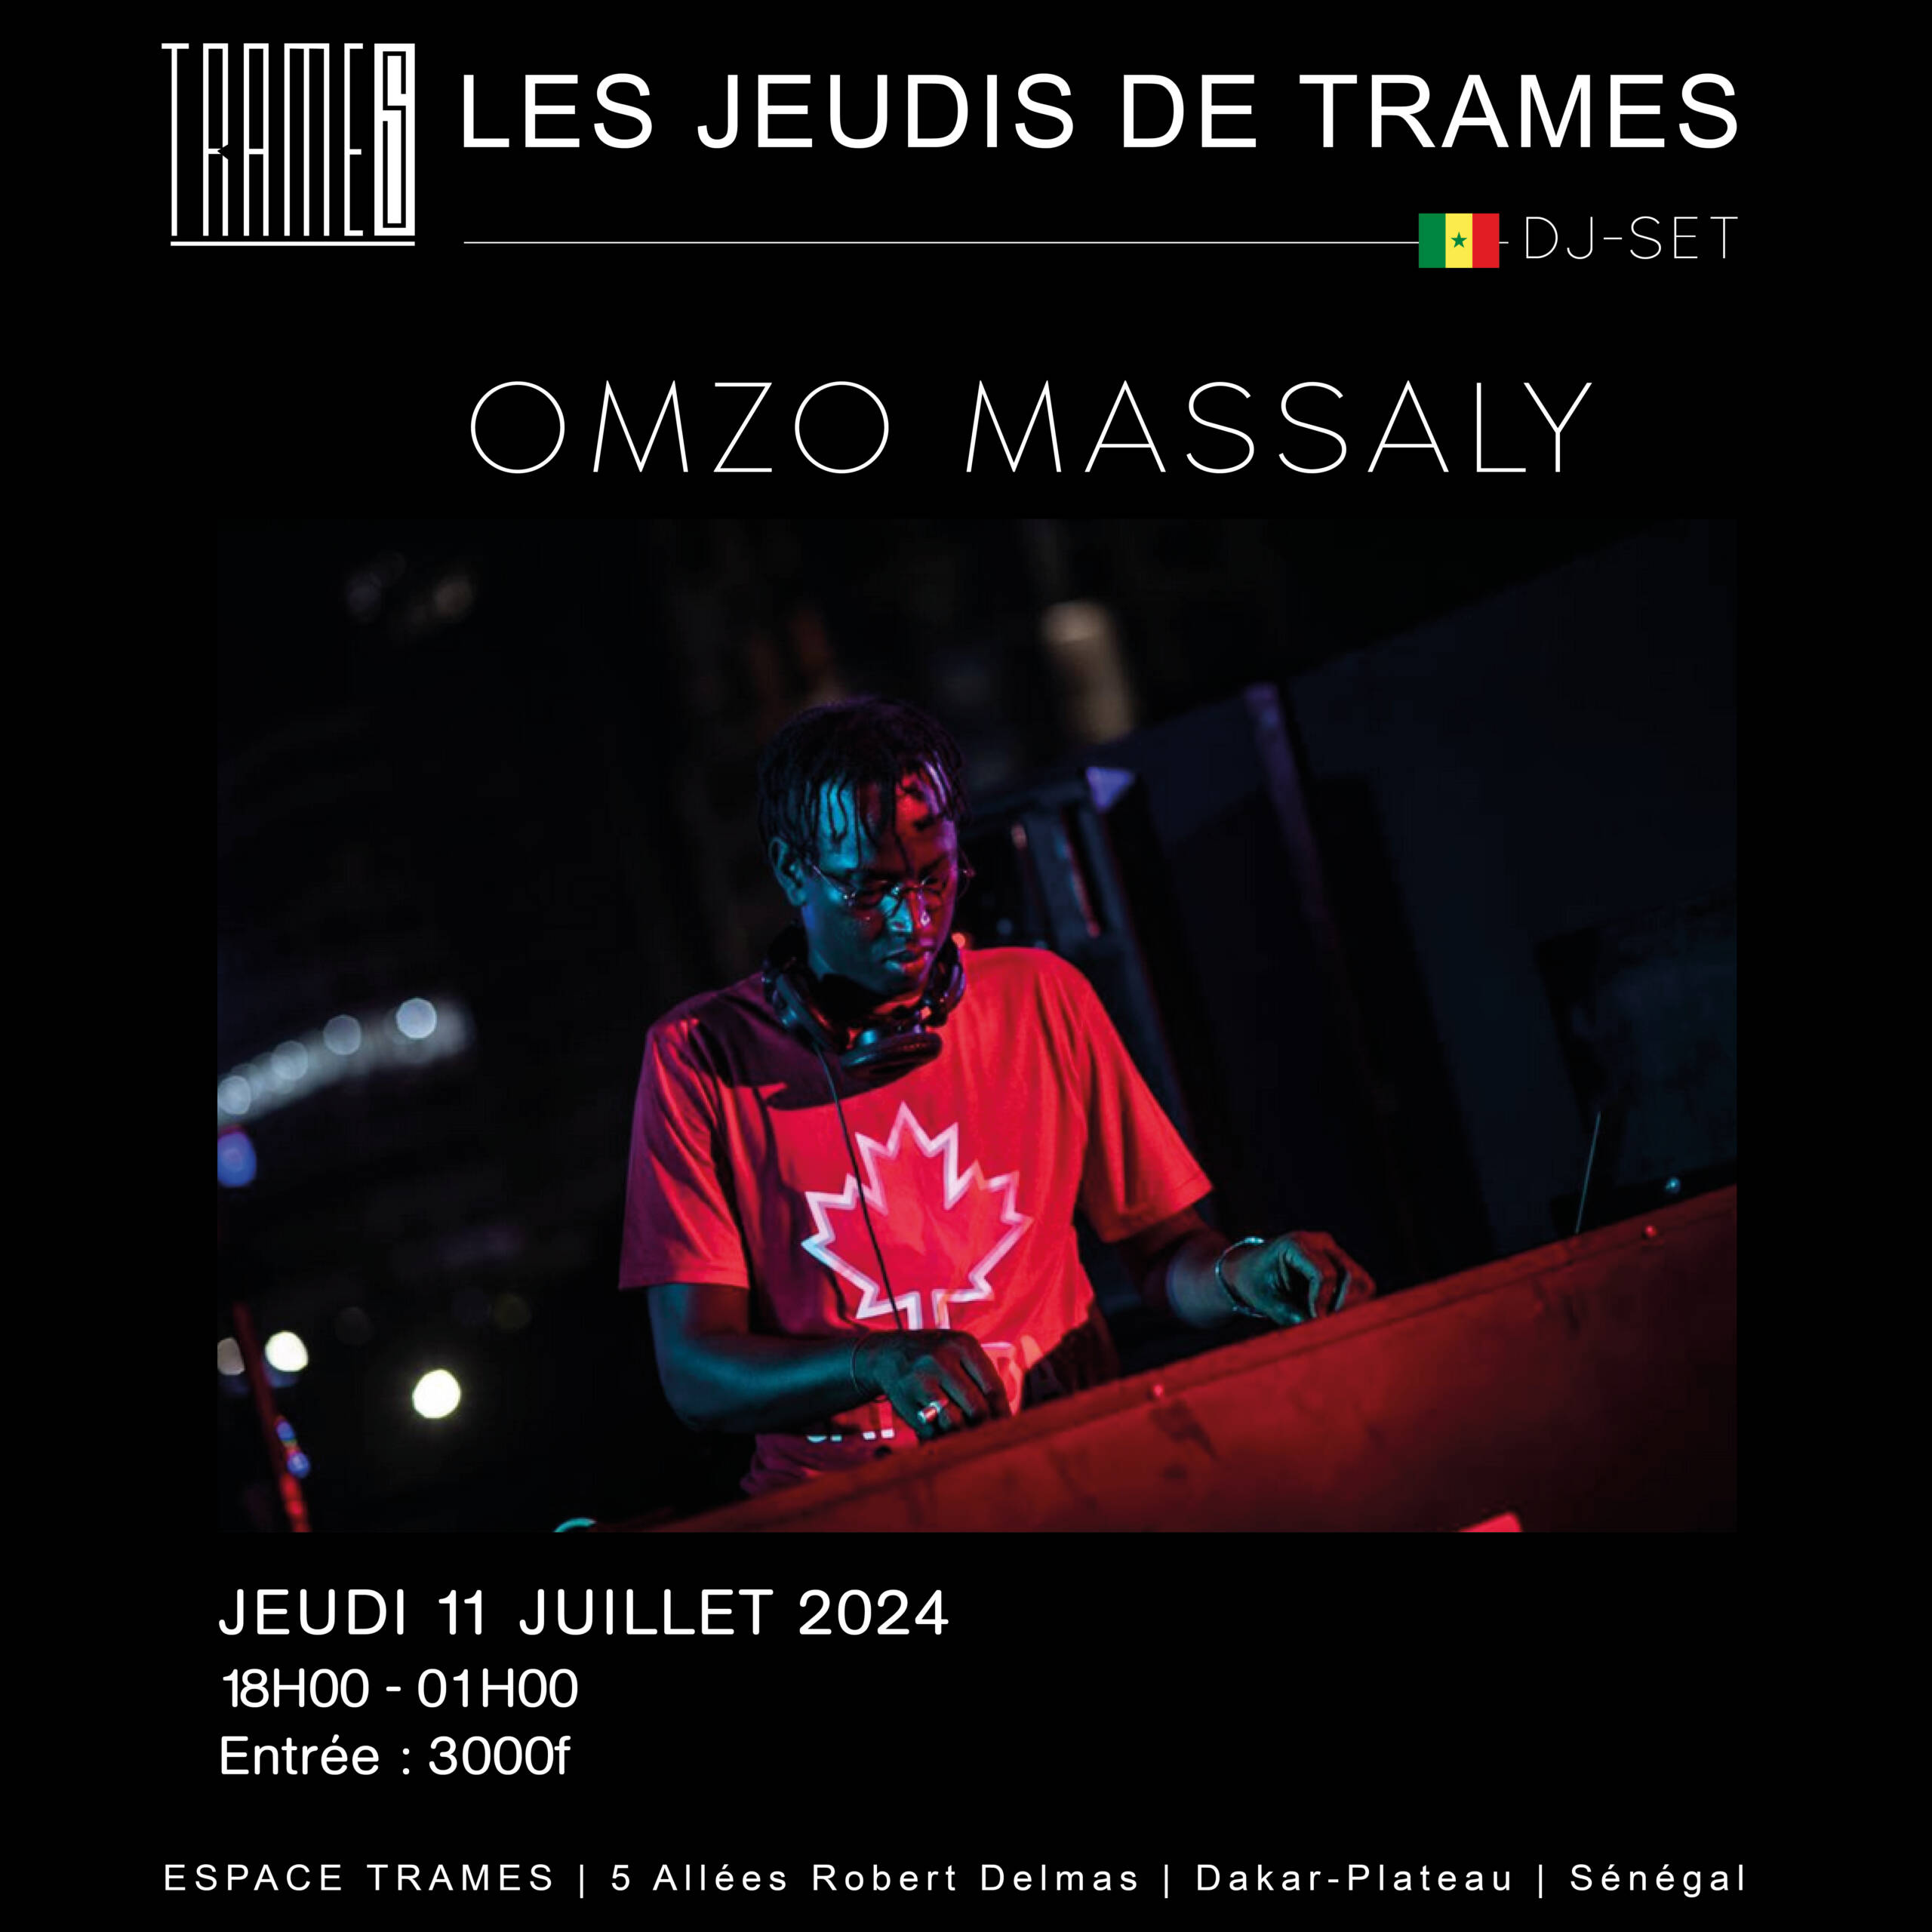 11juillet-OMZOMASSSALY